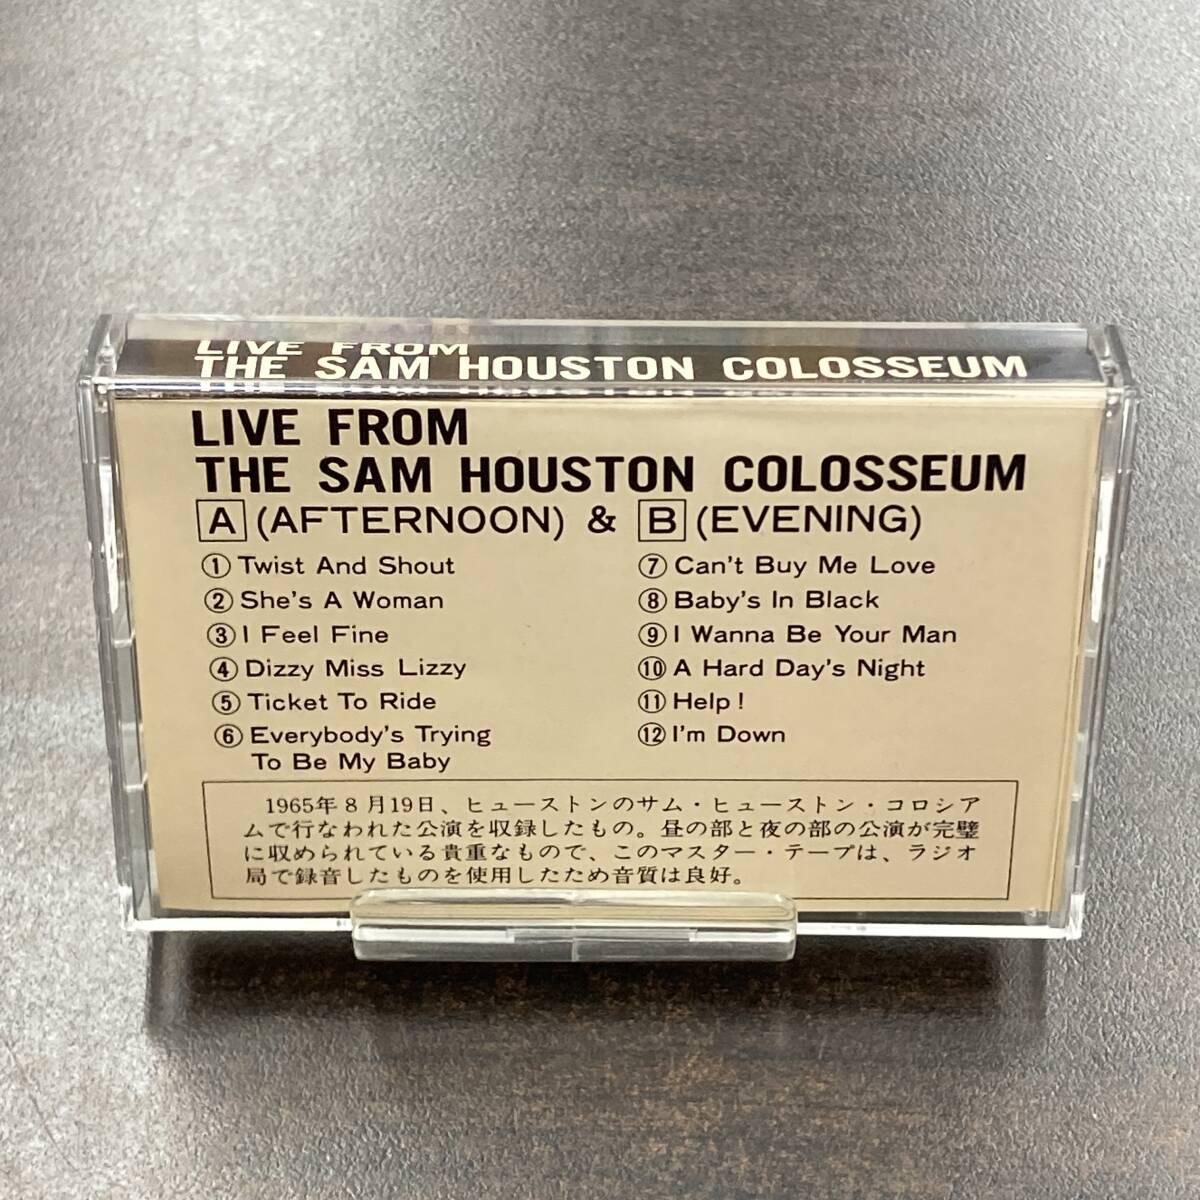 1216M ザ・ビートルズ 研究資料 LIVE FROM THE SAM HOUSTON COLOSSEUM カセットテープ / THE BEATLES Research materials Cassette Tapeの画像6